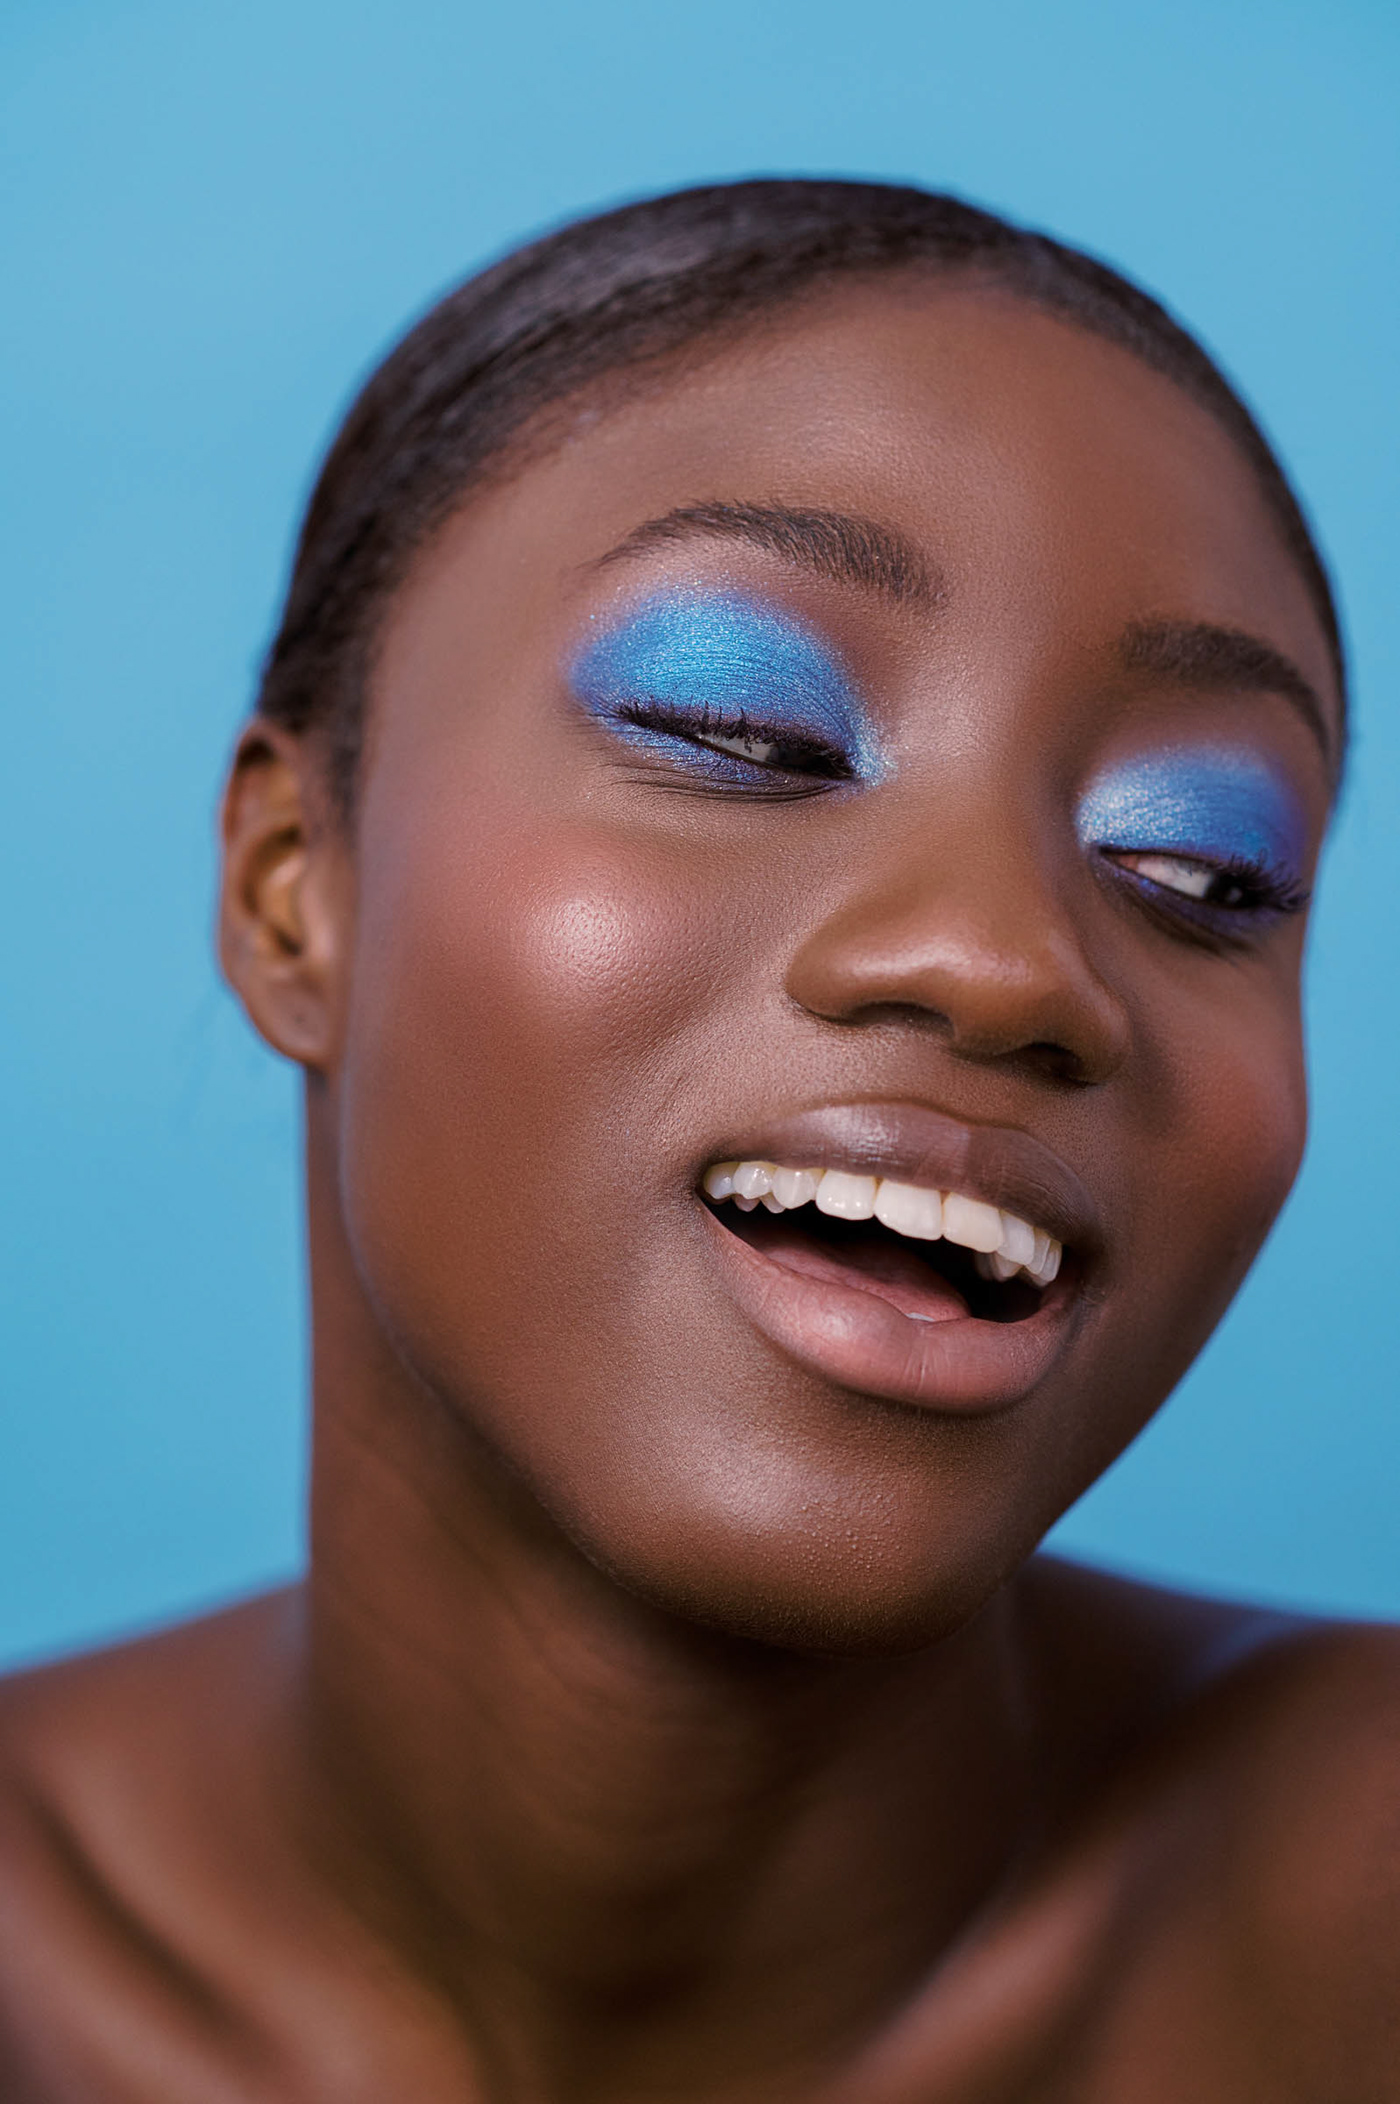 Shimmery eye-make up looks in different tones are the main focus of this beauty editorial.